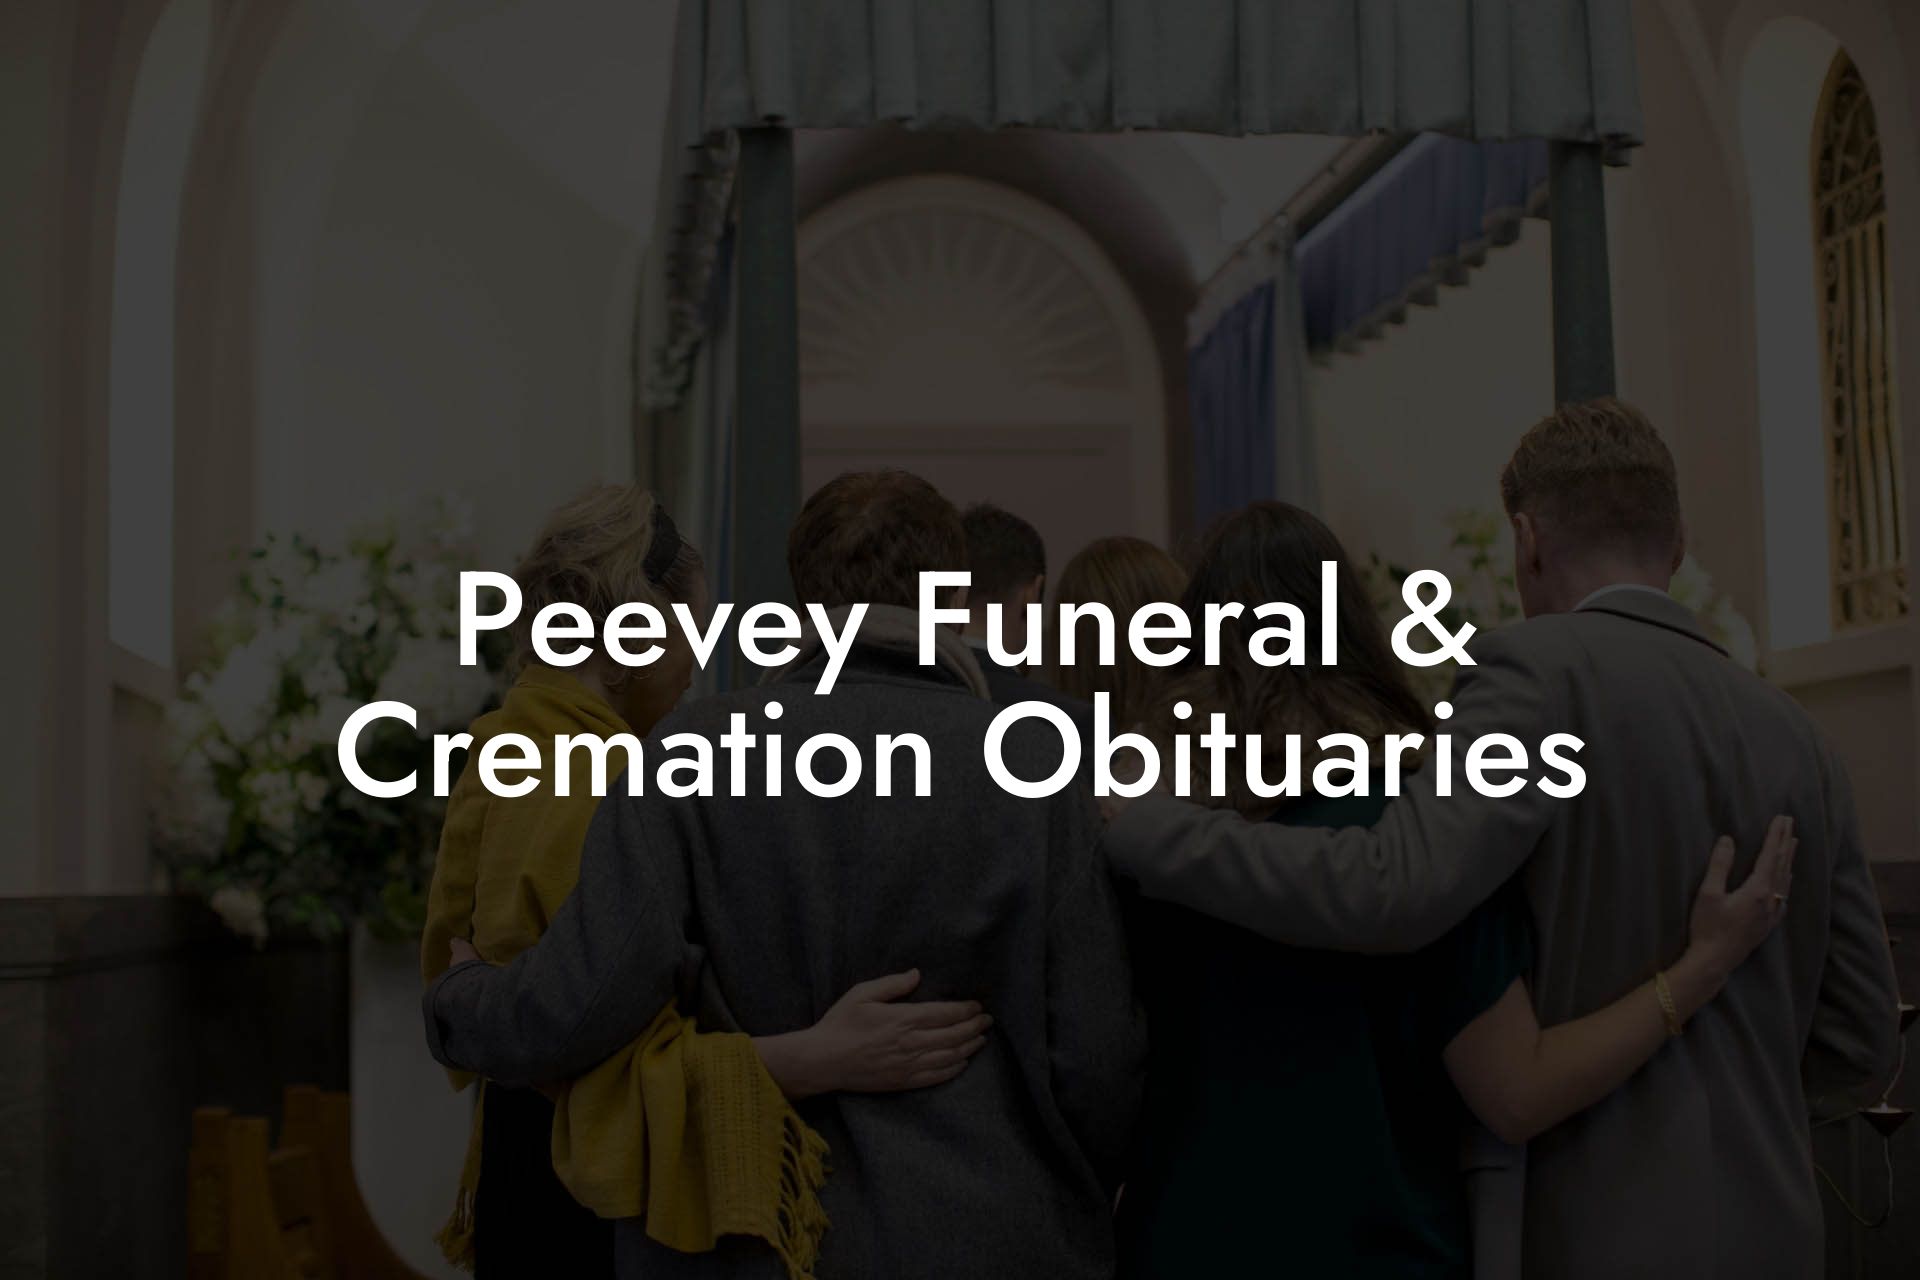 Peevey Funeral & Cremation Obituaries